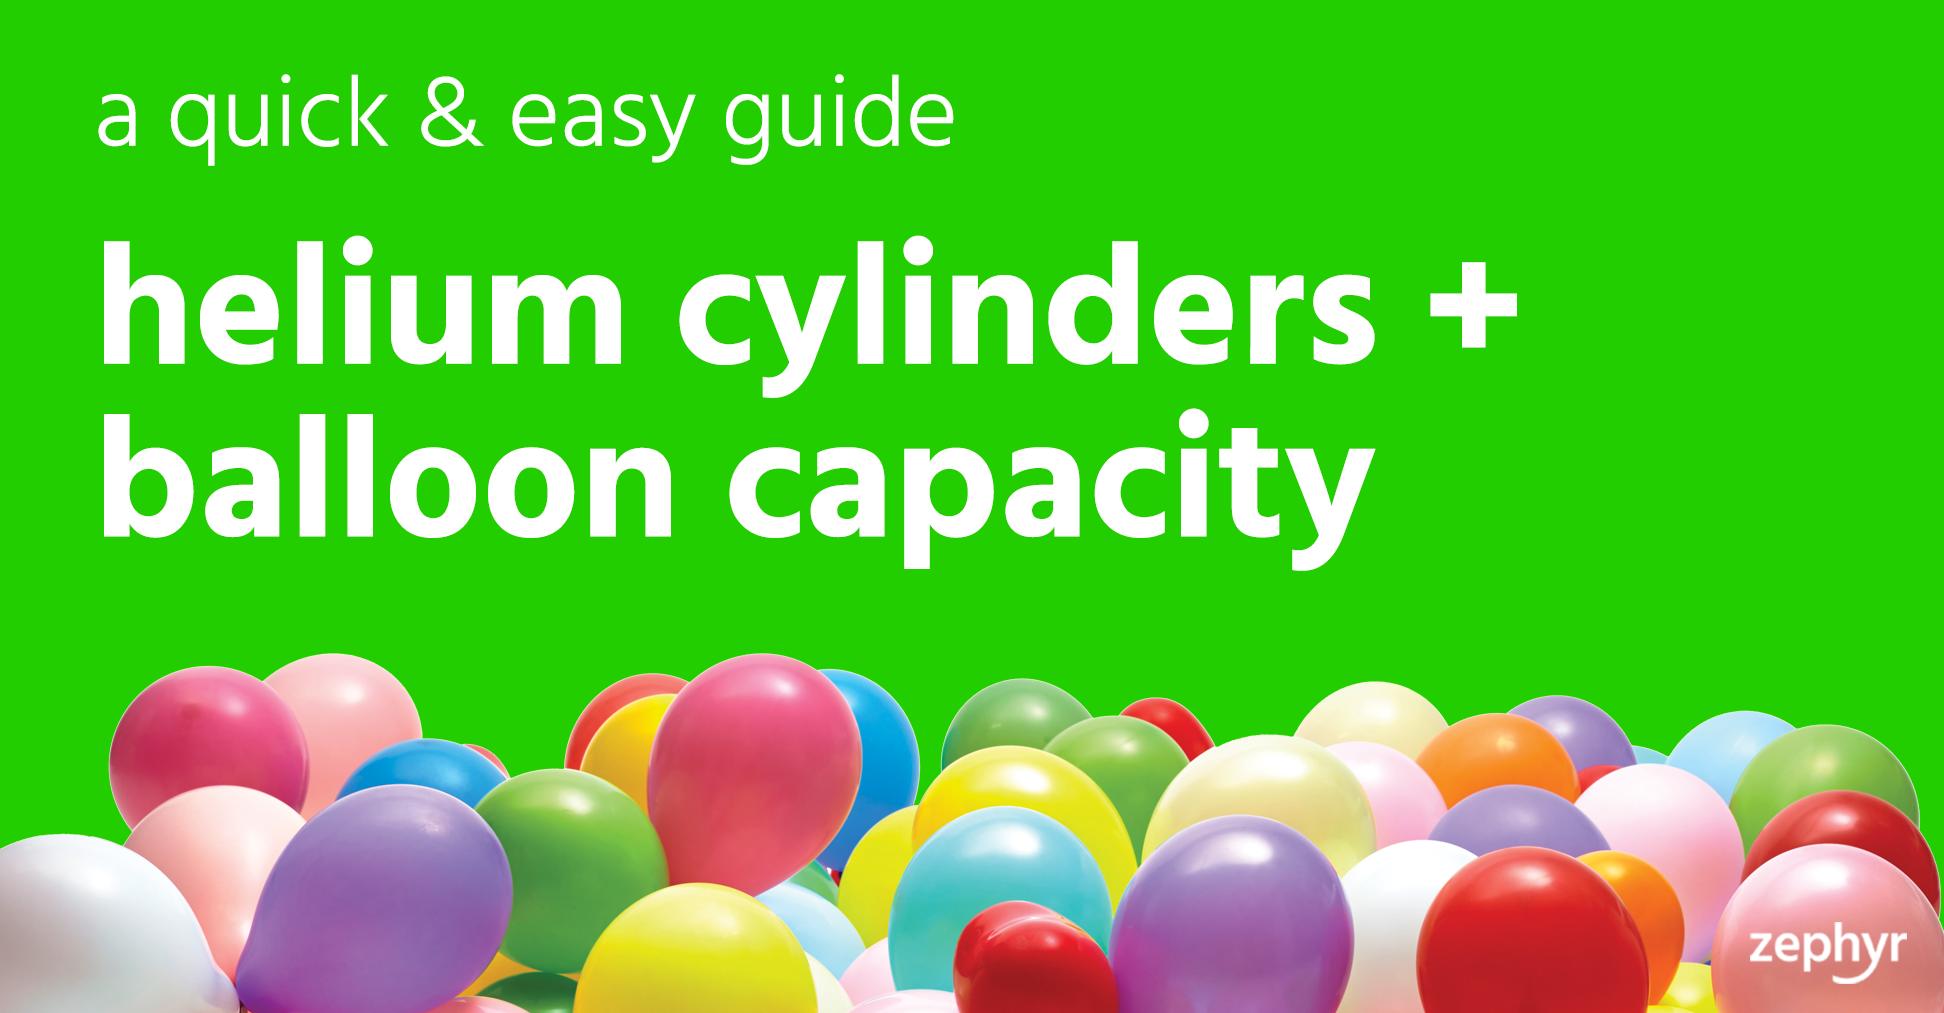 Helium cylinders & balloon capacity guide